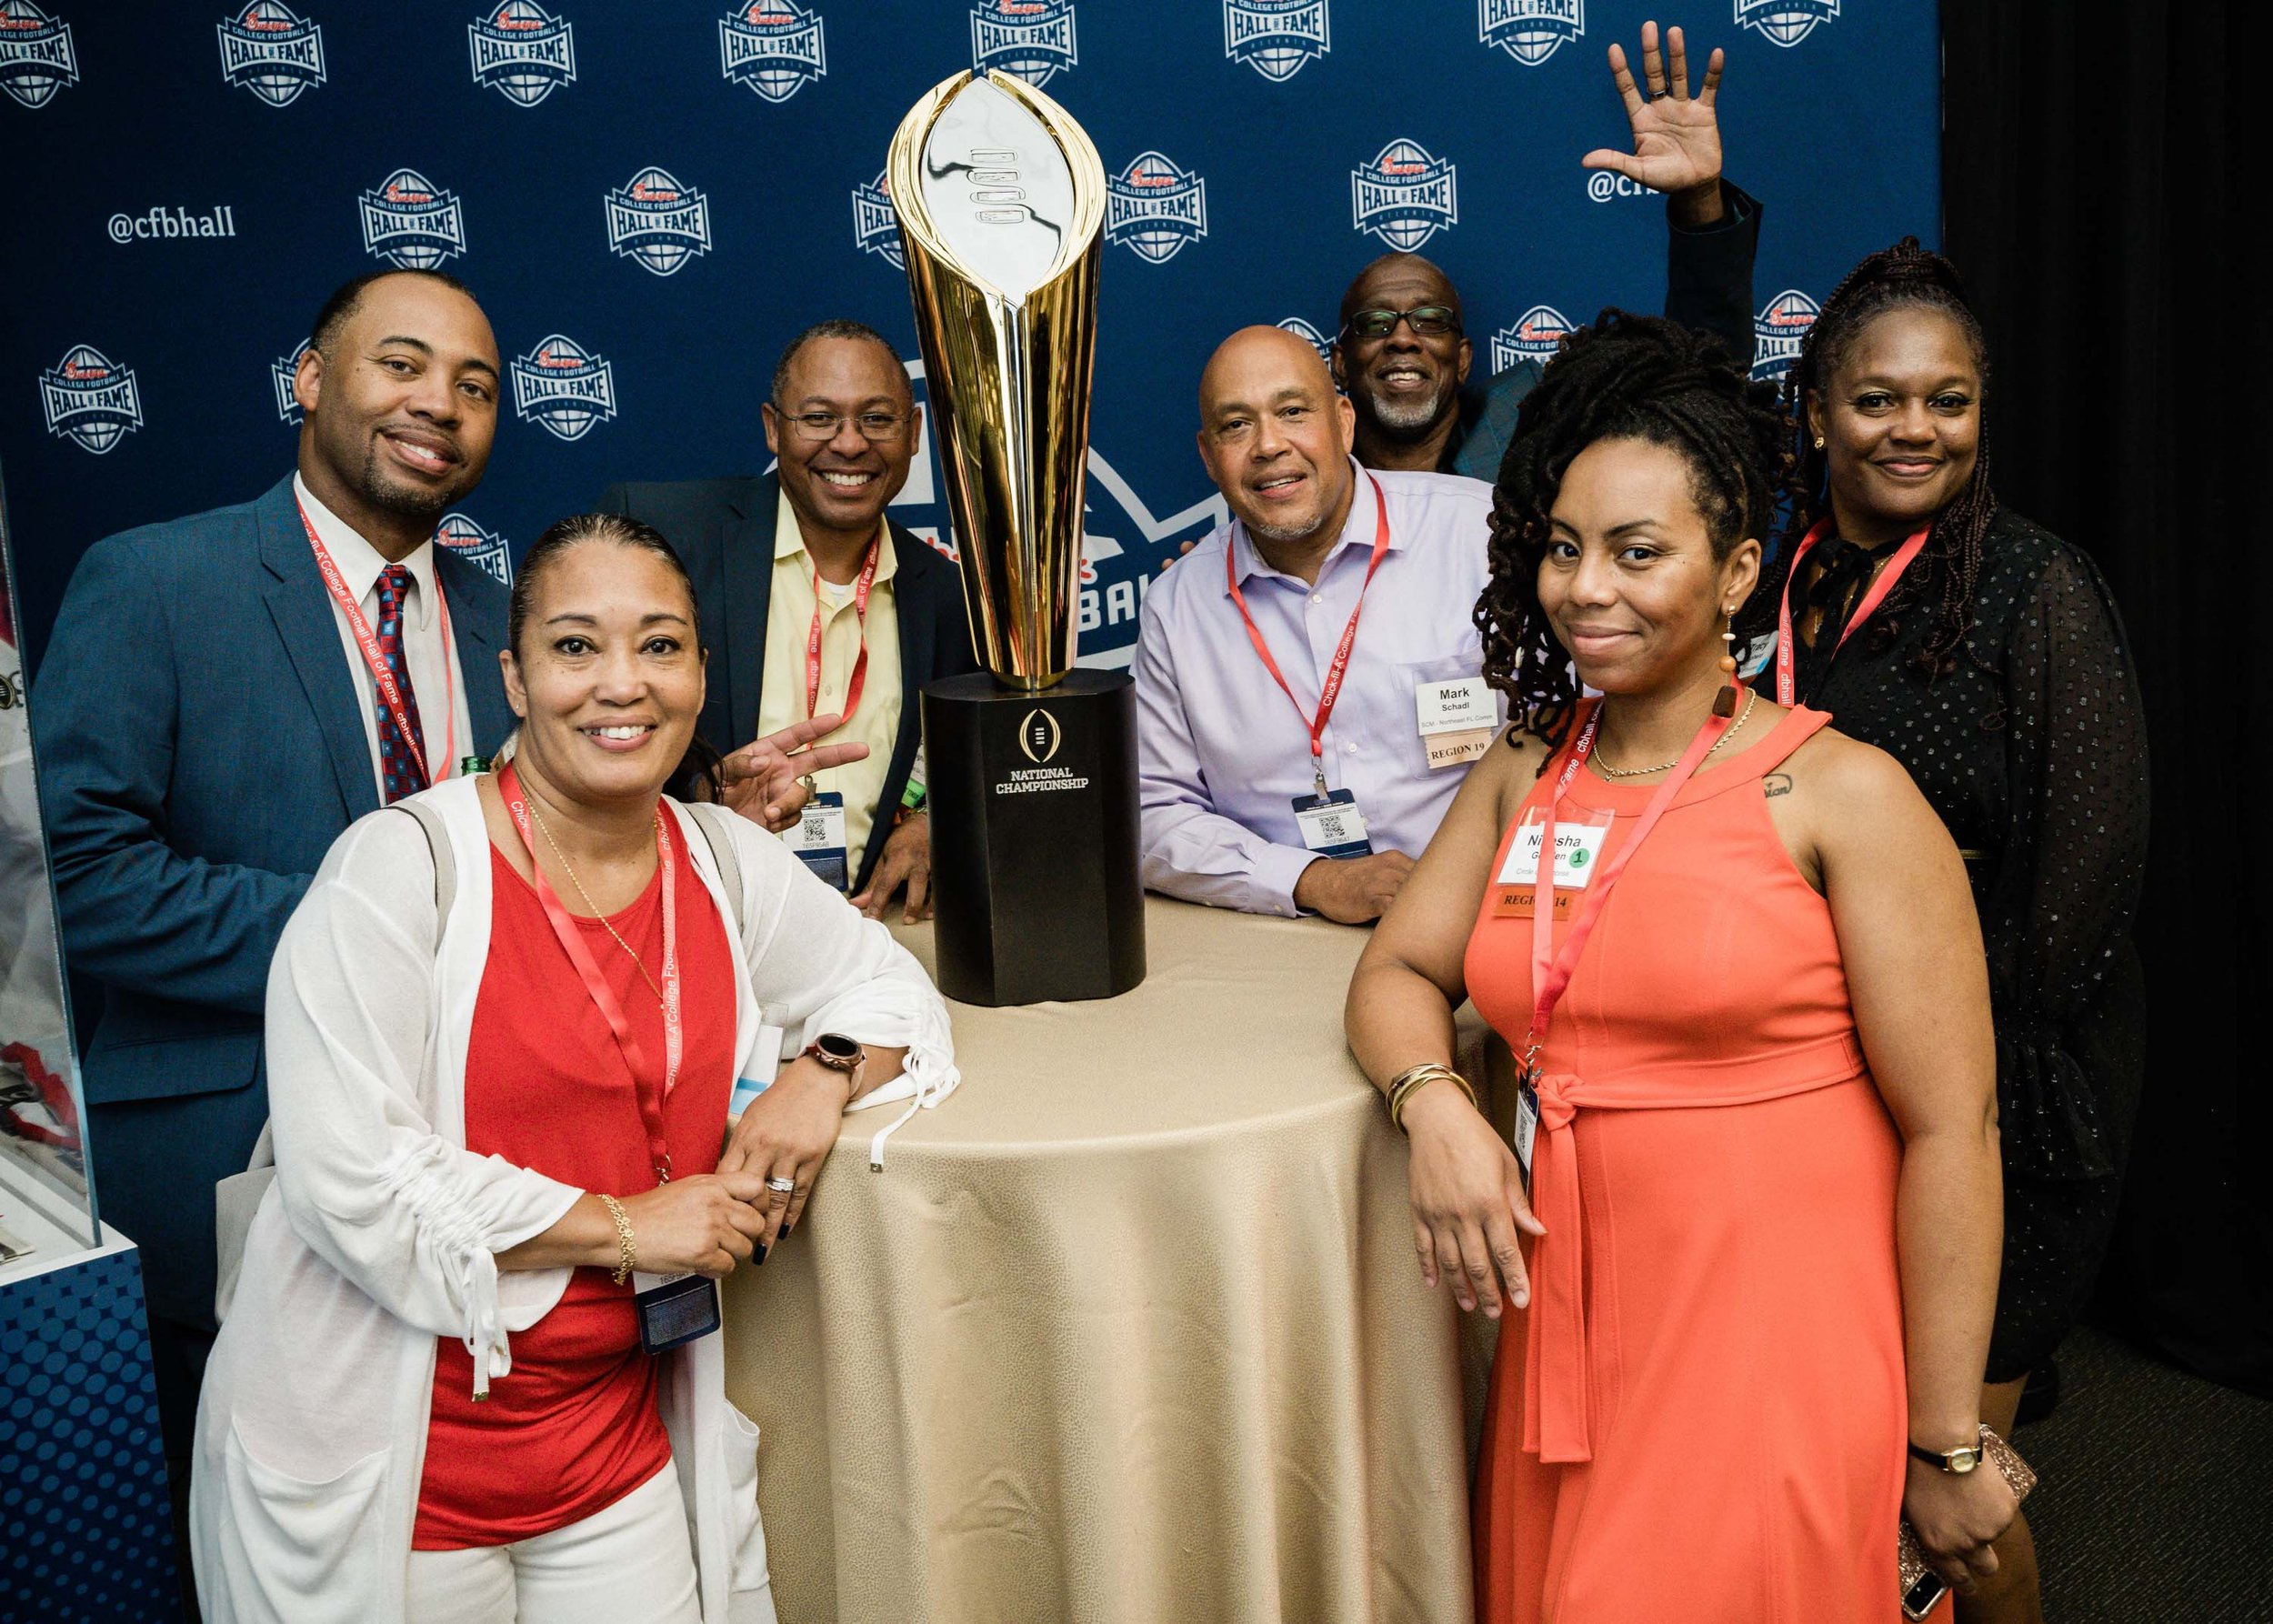  Group photo at the Chick-fil-a College Football Hall of Fame company event. 